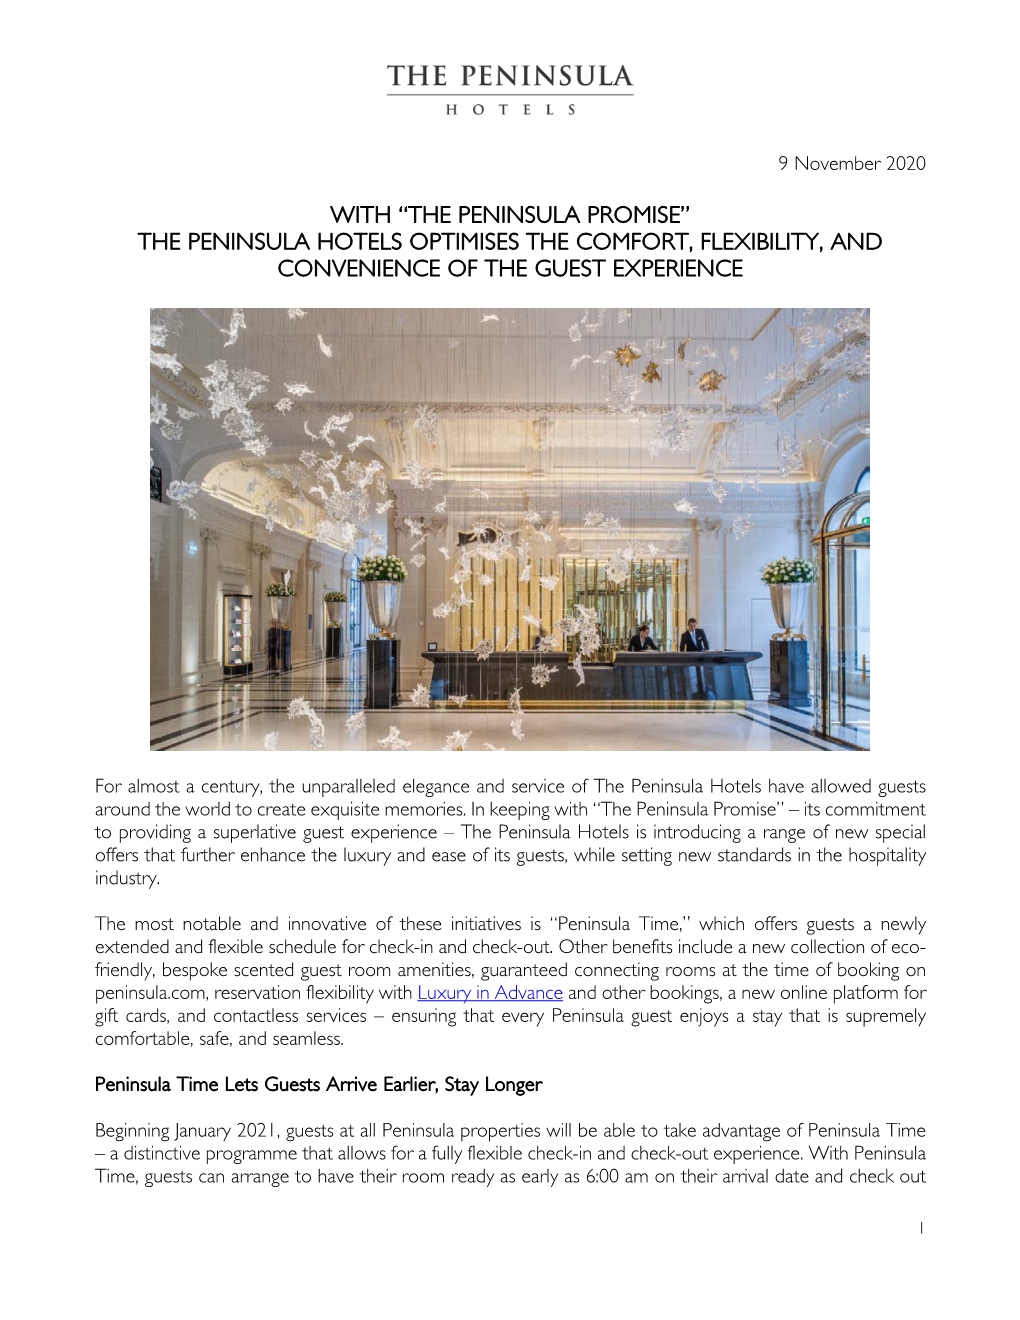 The Peninsula Promise” the Peninsula Hotels Optimises the Comfort, Flexibility, and Convenience of the Guest Experience